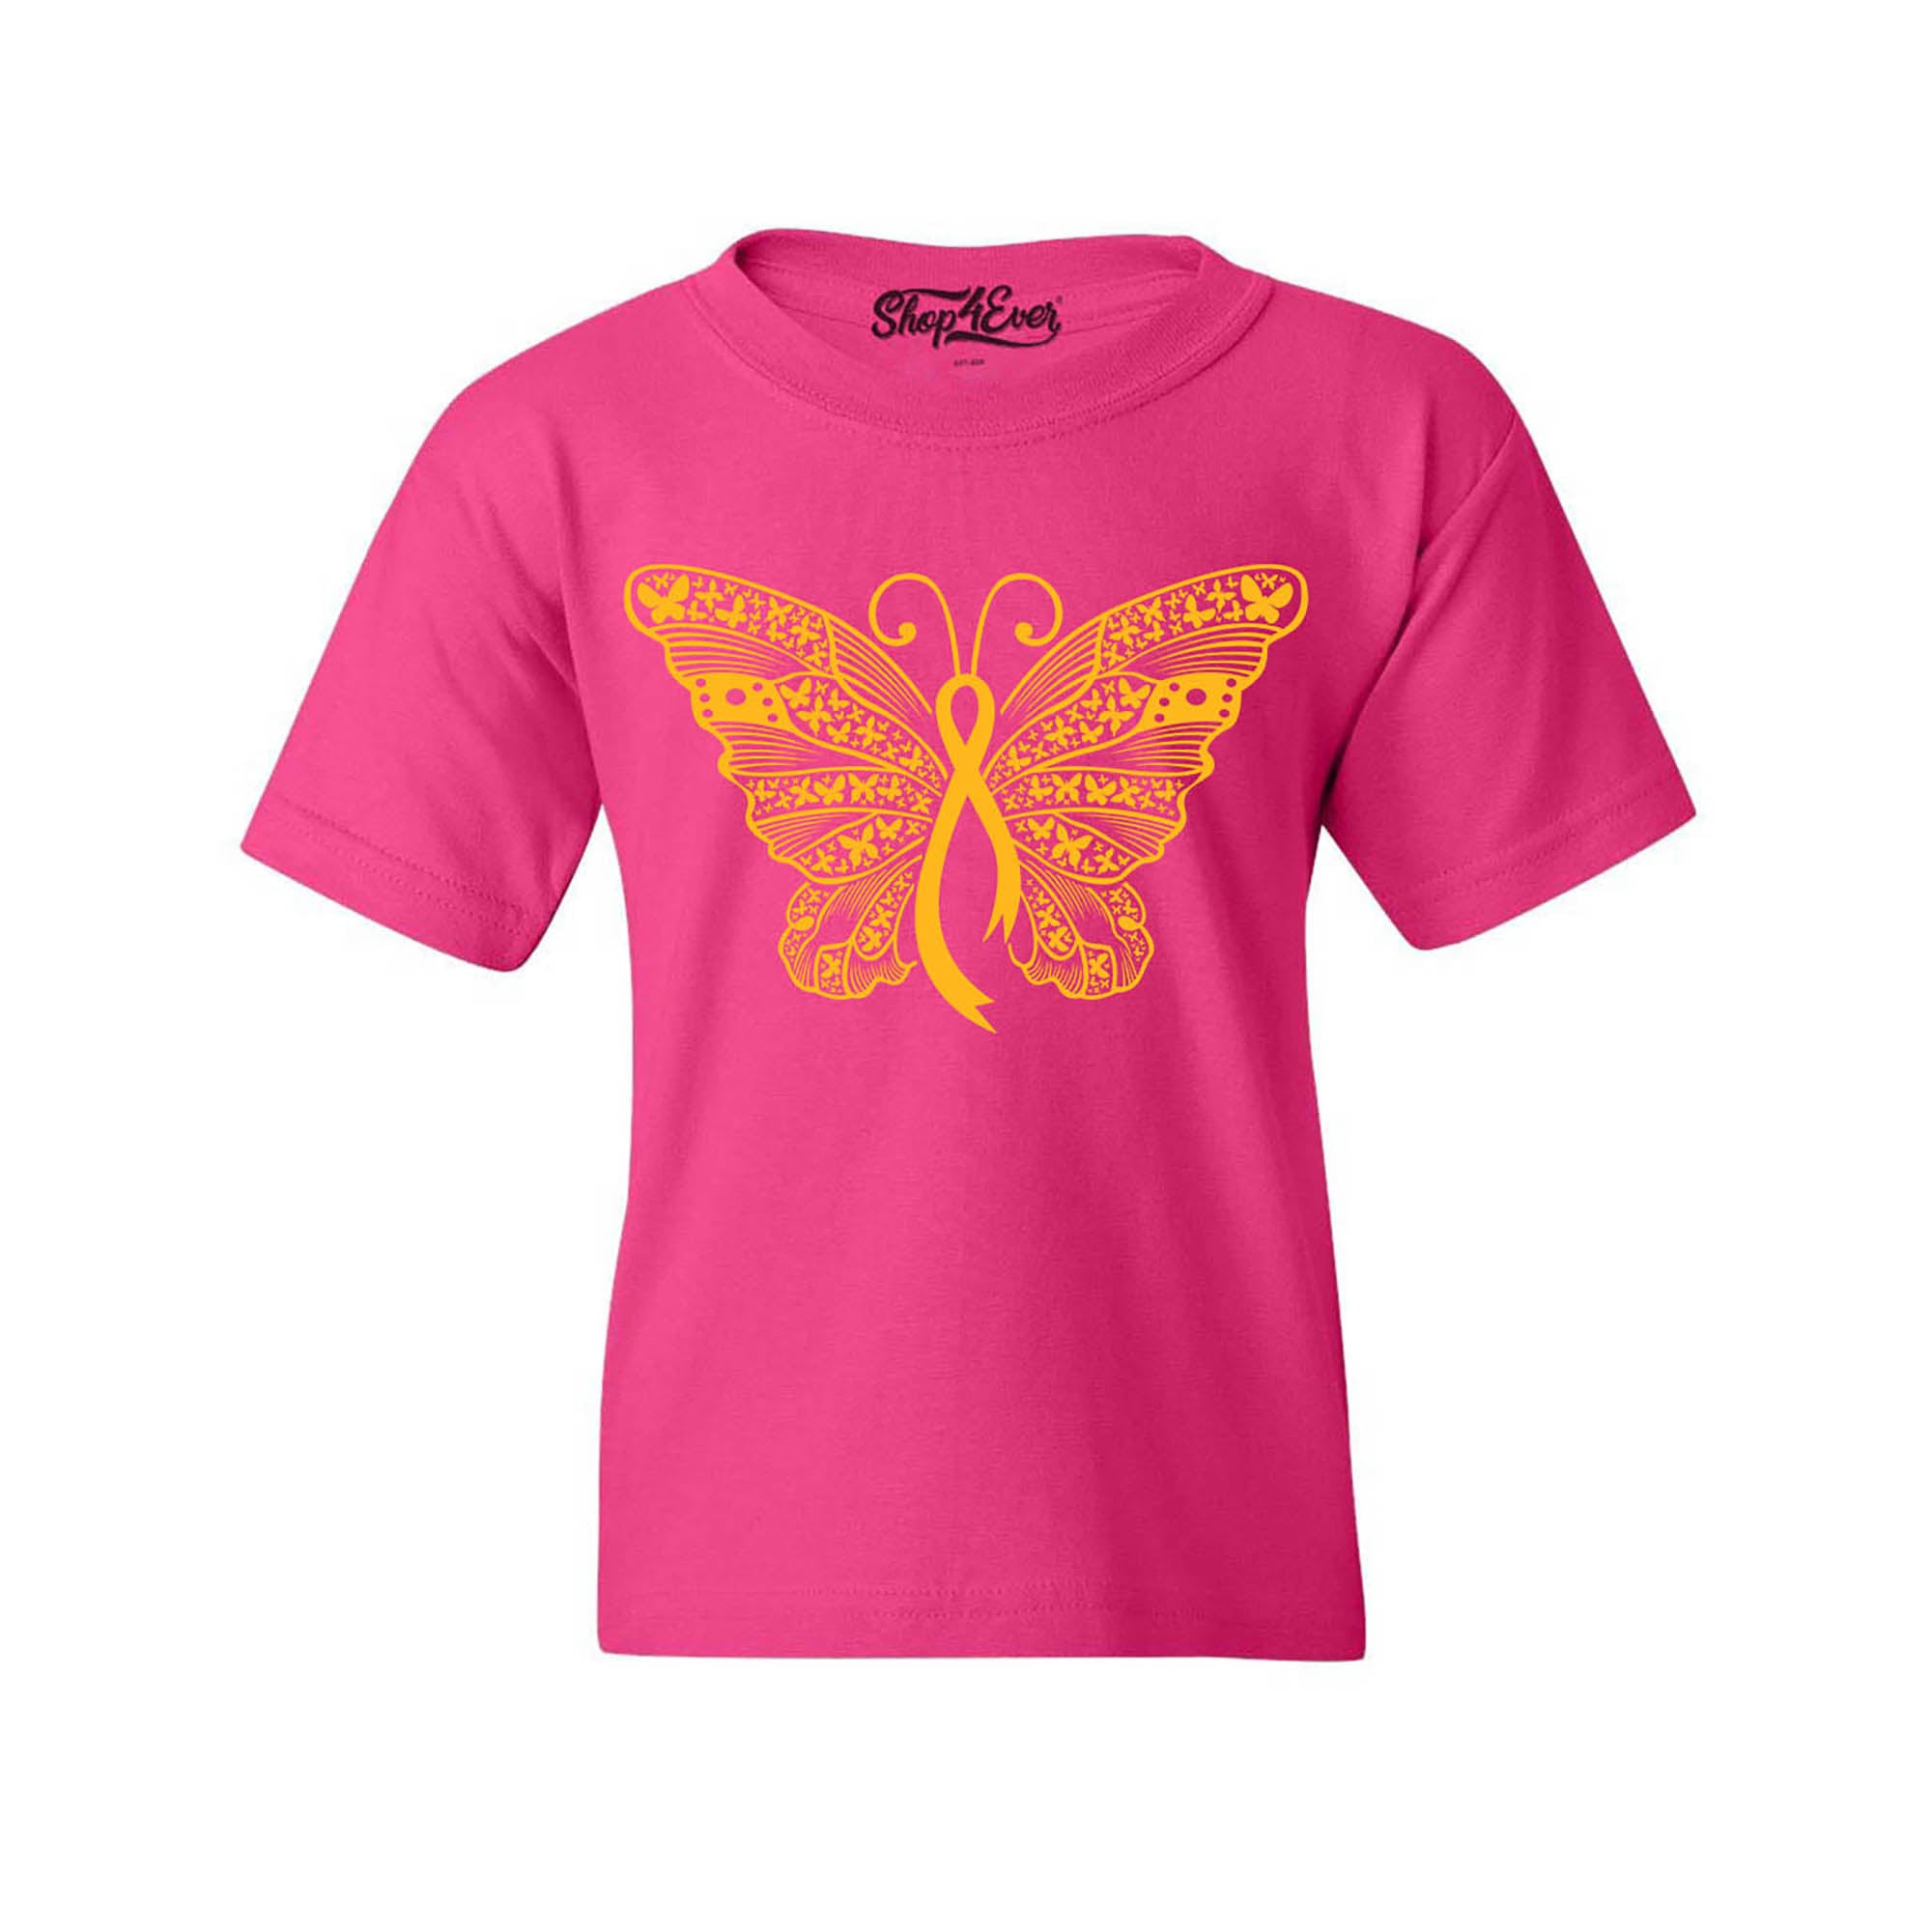 Gold Ribbon Butterfly Childhood Cancer Awareness Kids Child Tee Youth's T-Shirt